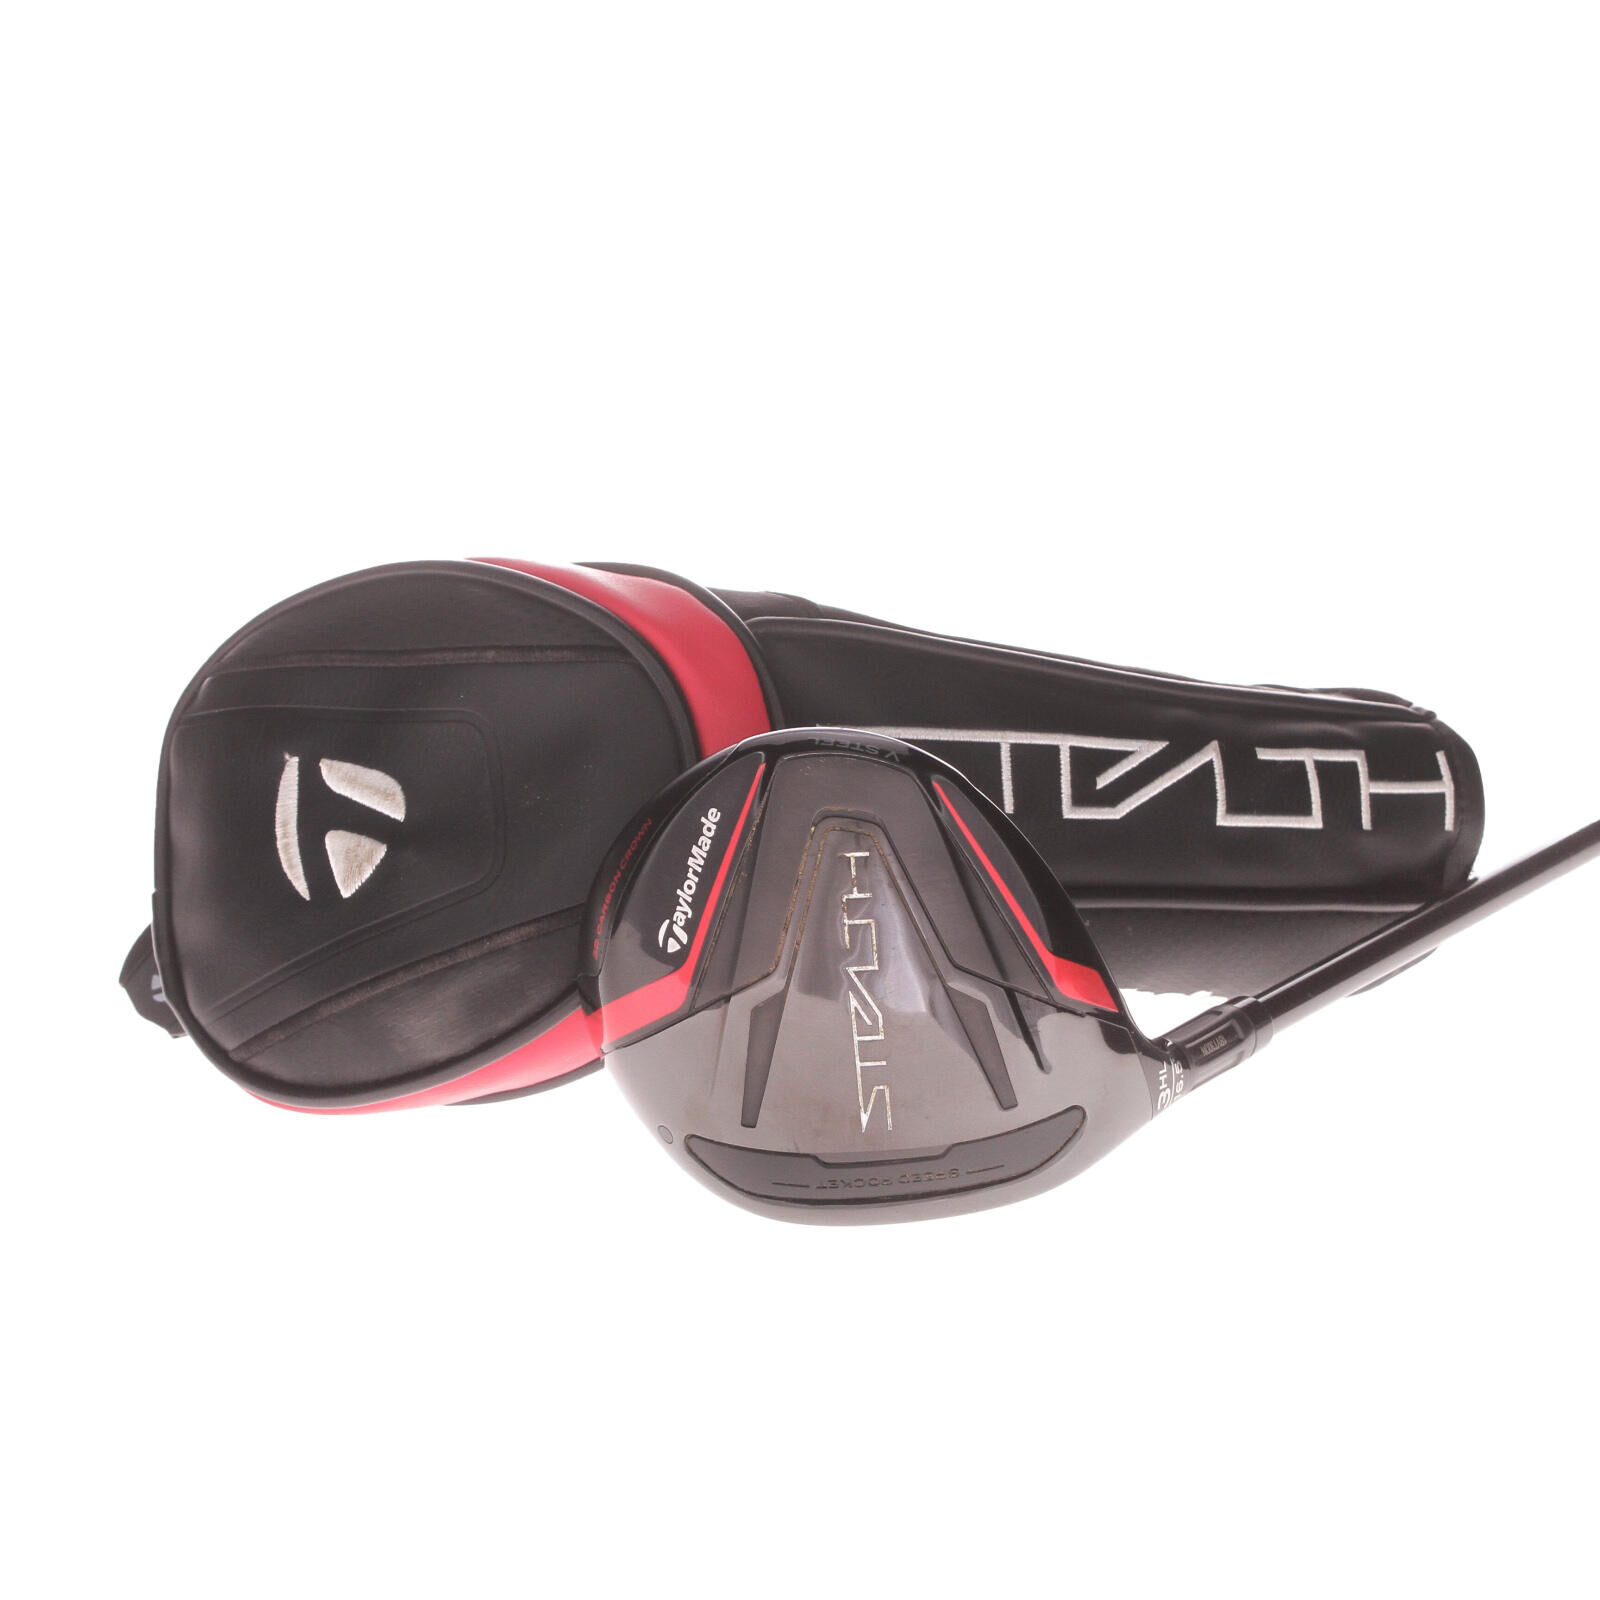 TAYLORMADE USED - Fairway 3 Wood HL TaylorMade Stealth 16.5* Graphite Shaft - GRADE B